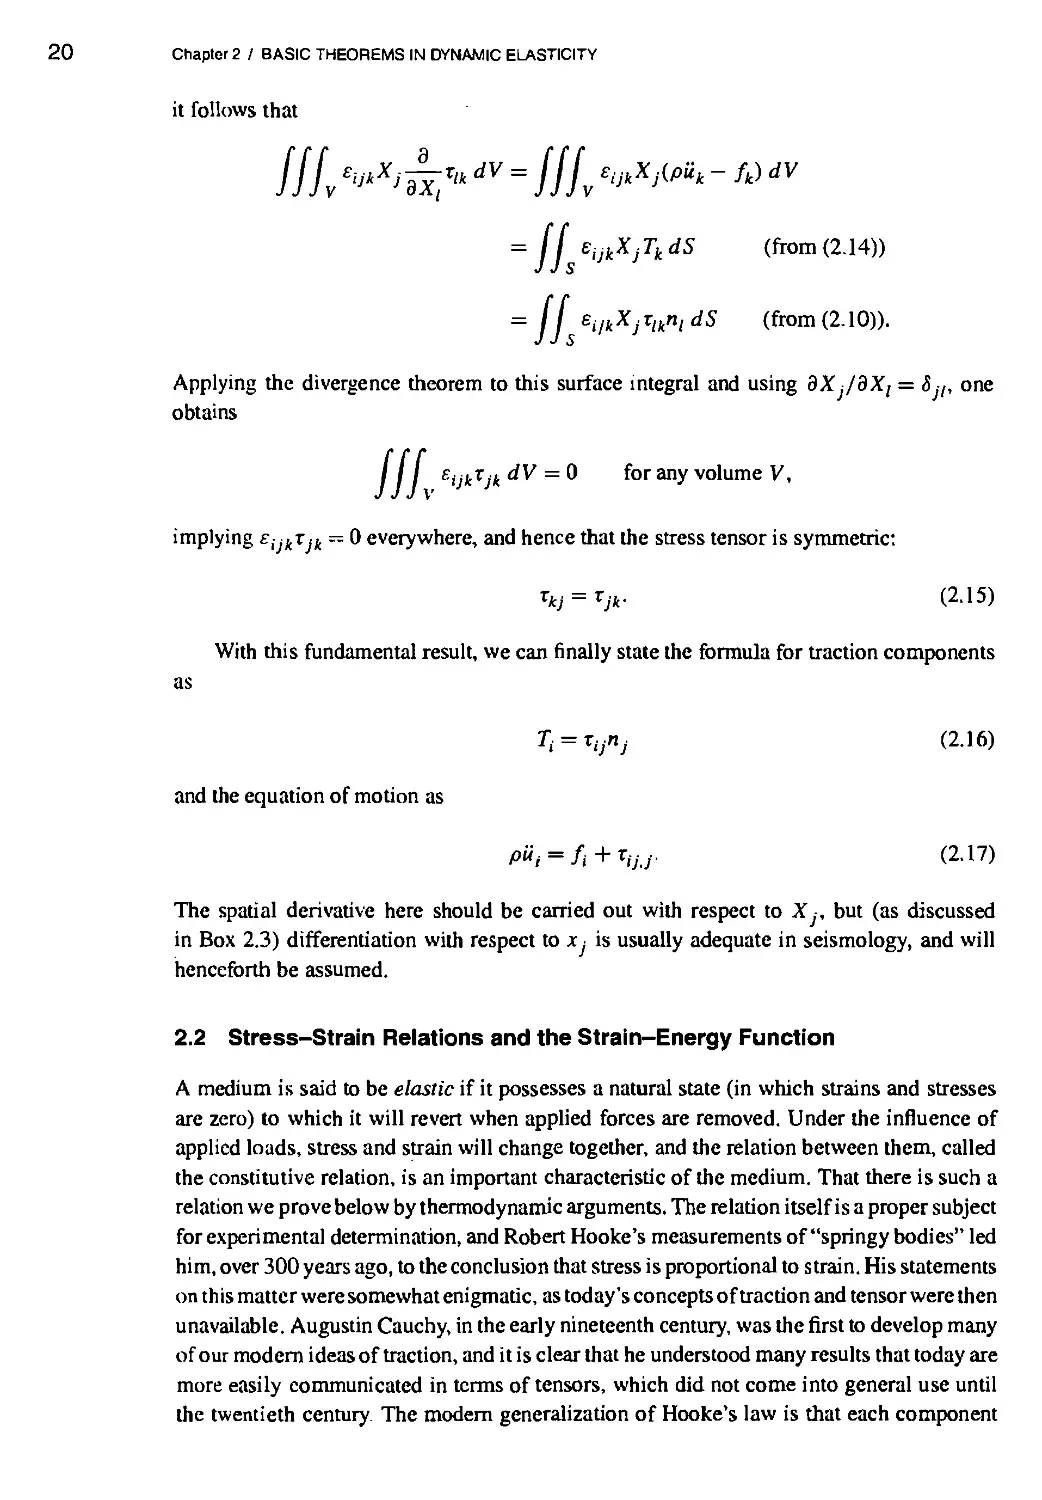 2.2 Stress-Strain Relations and the Strain-Energy Function